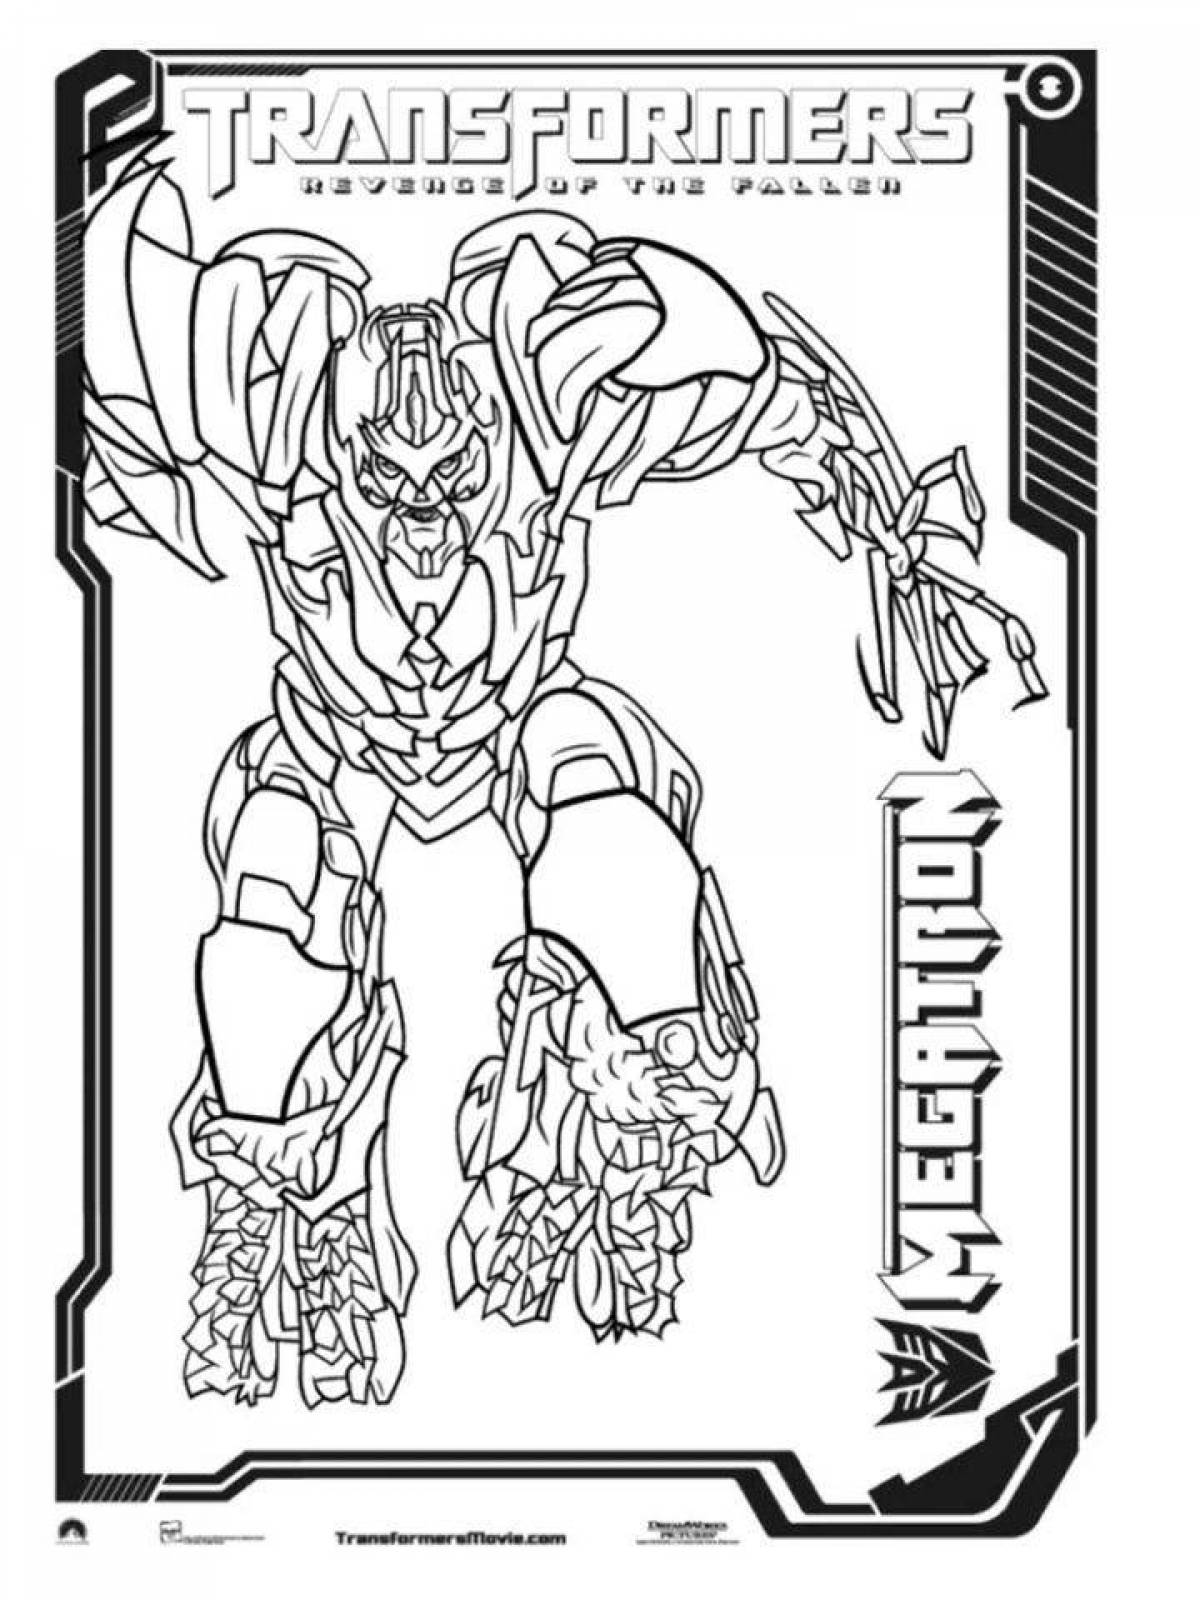 Megatron's brilliantly detailed coloring page